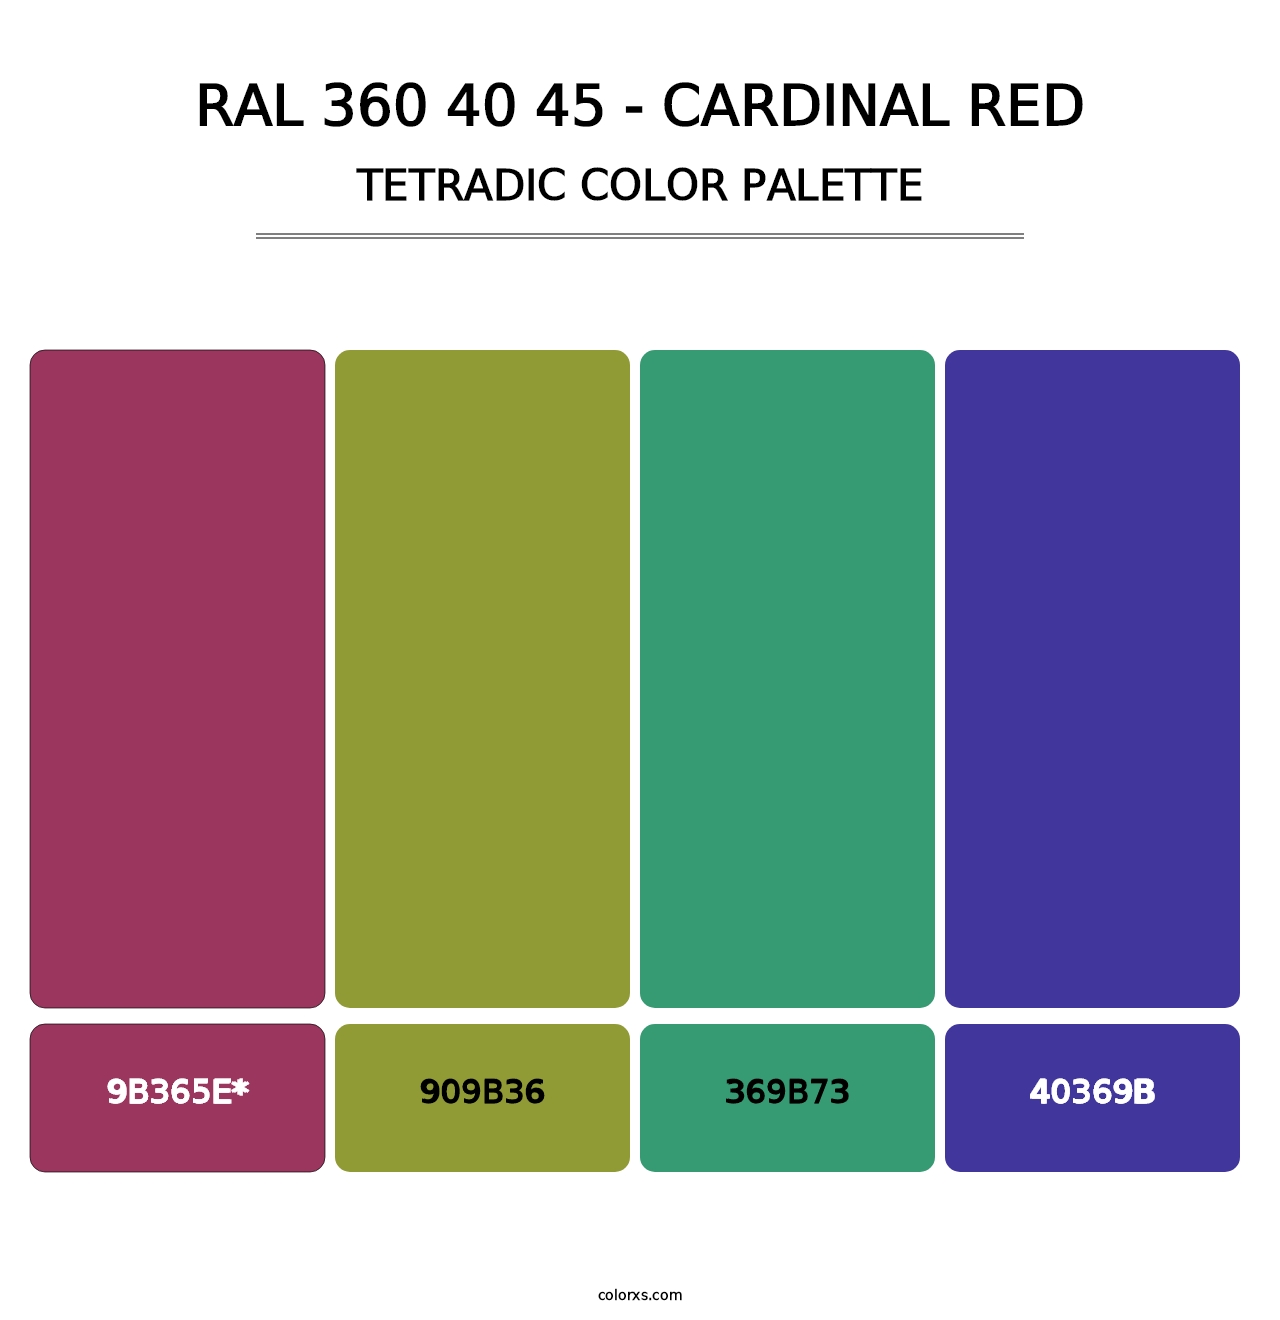 RAL 360 40 45 - Cardinal Red - Tetradic Color Palette